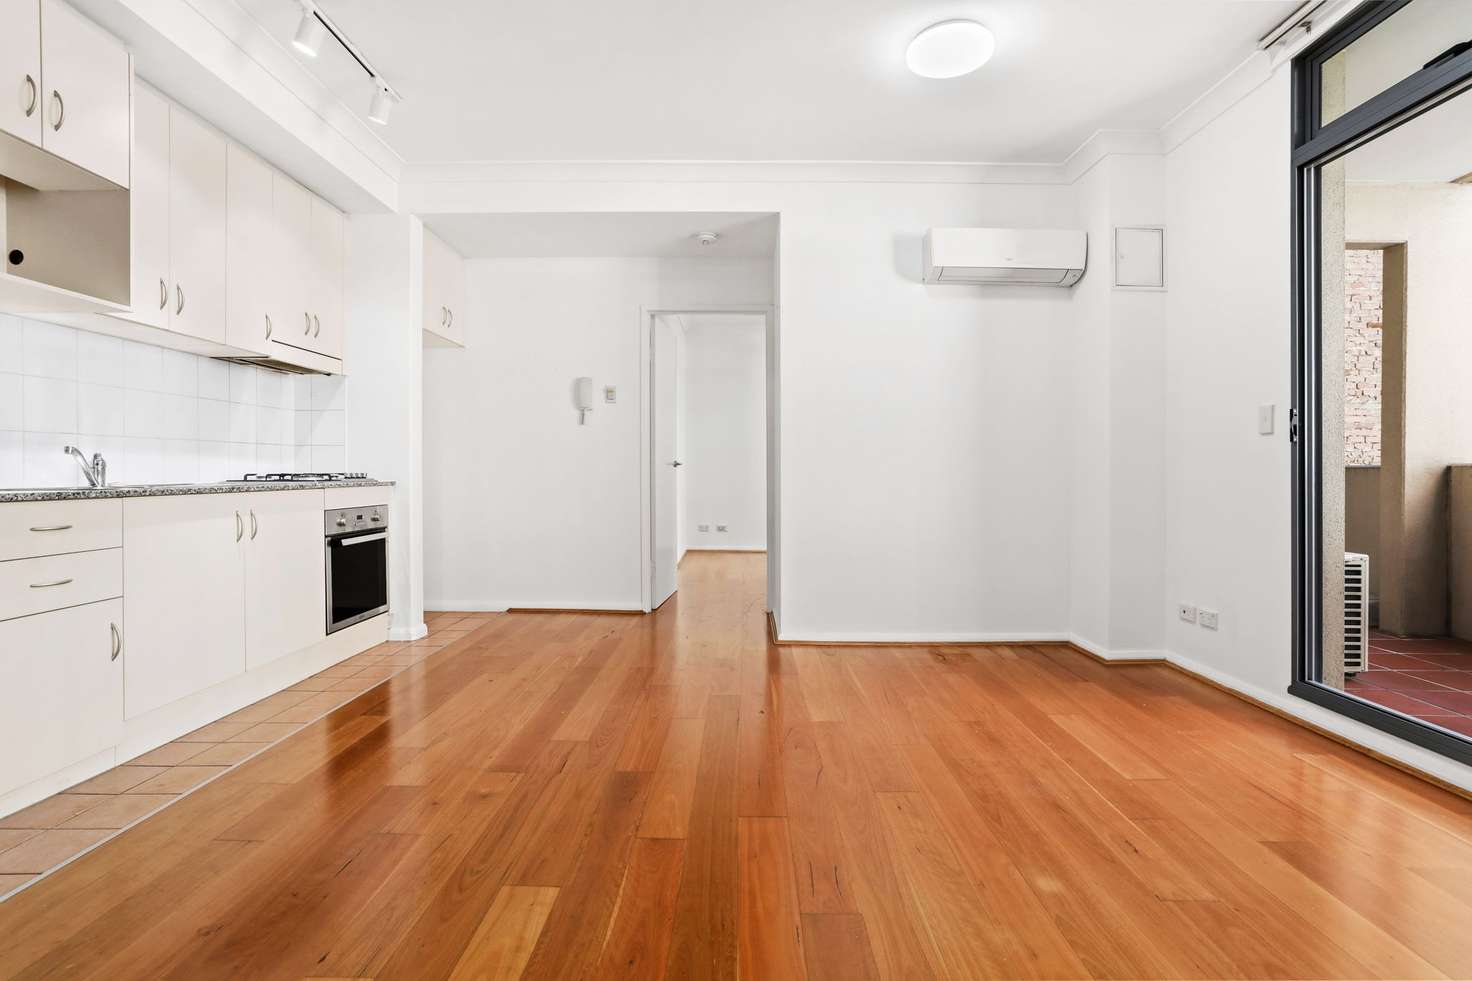 Main view of Homely apartment listing, 12/2 Brisbane St, Surry Hills NSW 2010